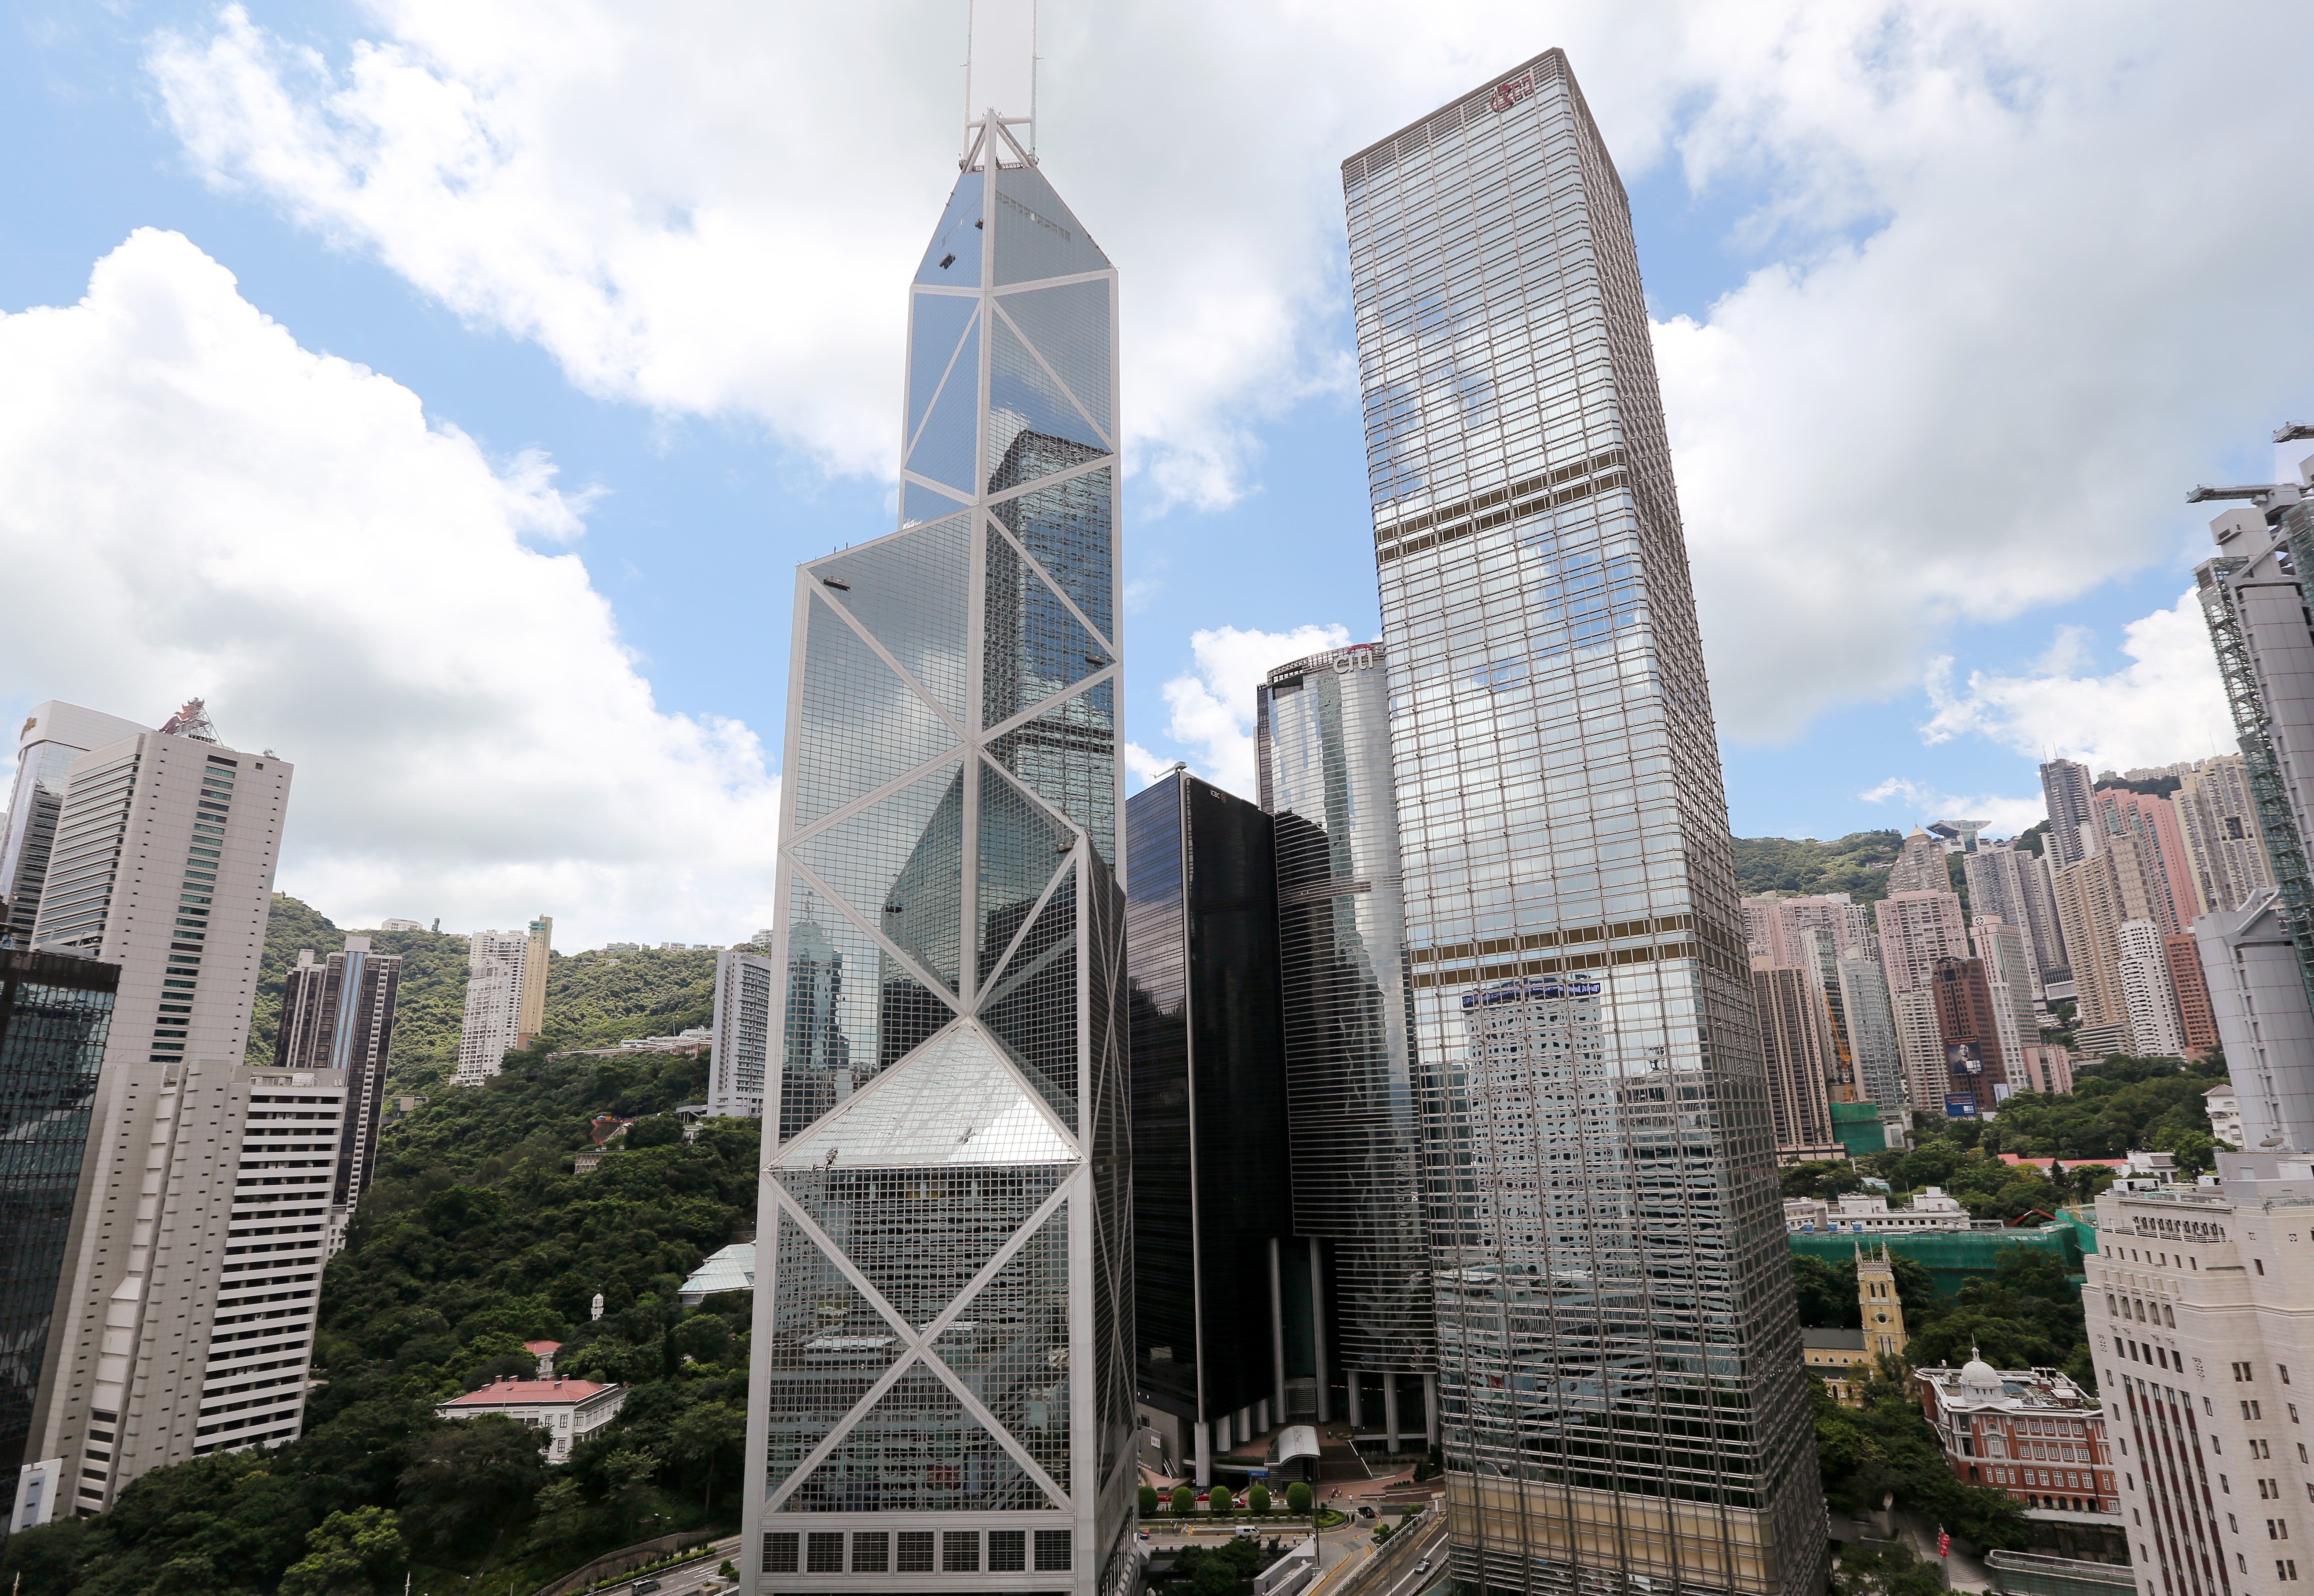 The Bank of China Tower (left) is an icon in Hong Kong’s skyline. Photo: Felix Wong